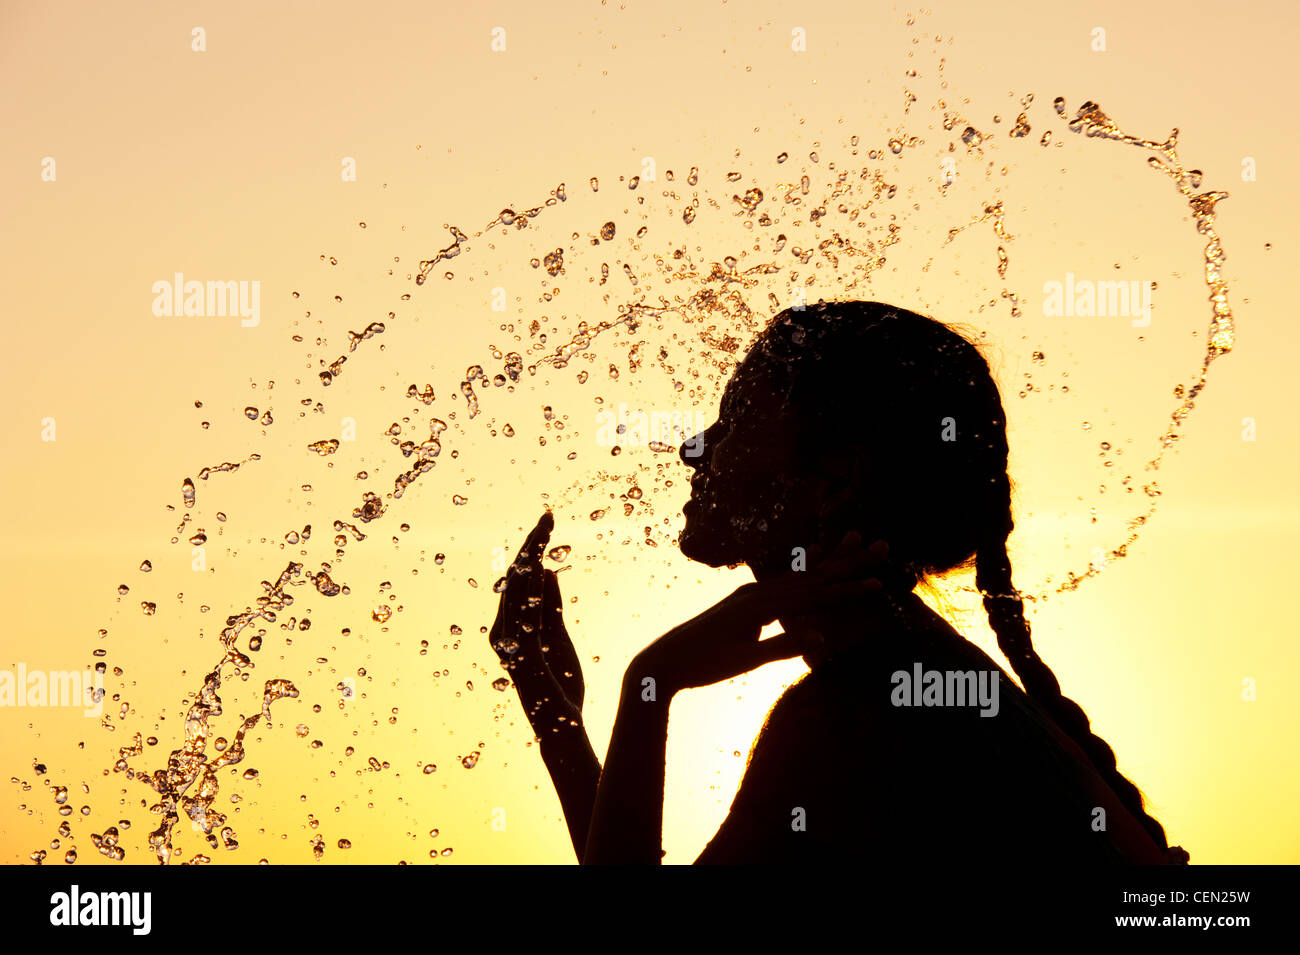 Indian girl splashing water over herself at sunset. Silhouette. India Stock Photo